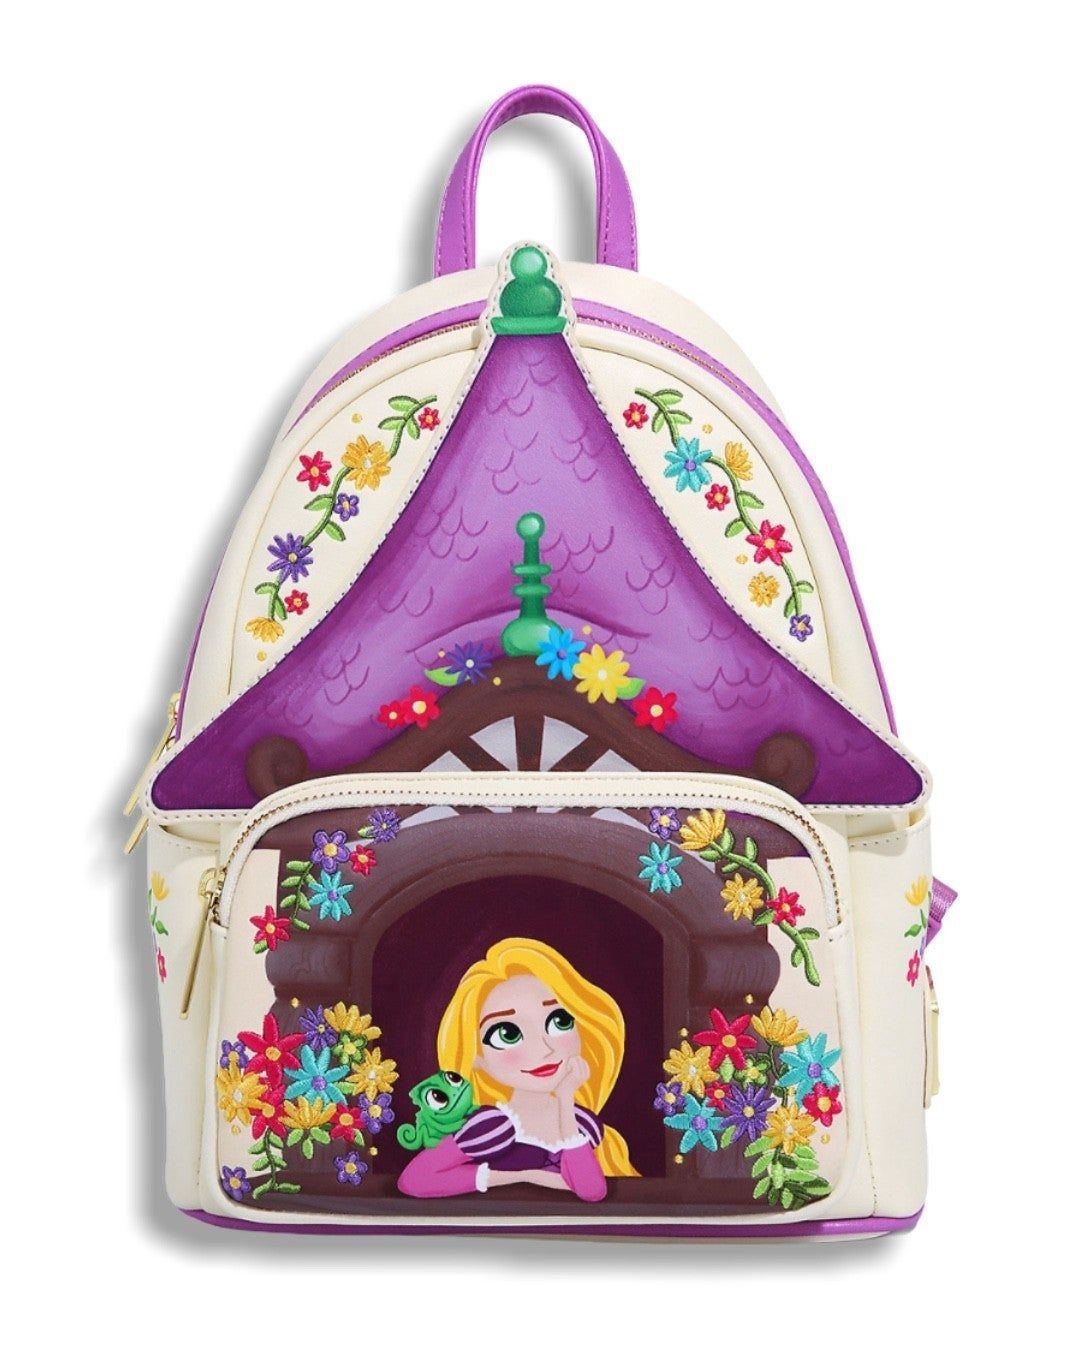 A Favorite 'Tangled' Sidekick Has His Own Disney Loungefly Bag!